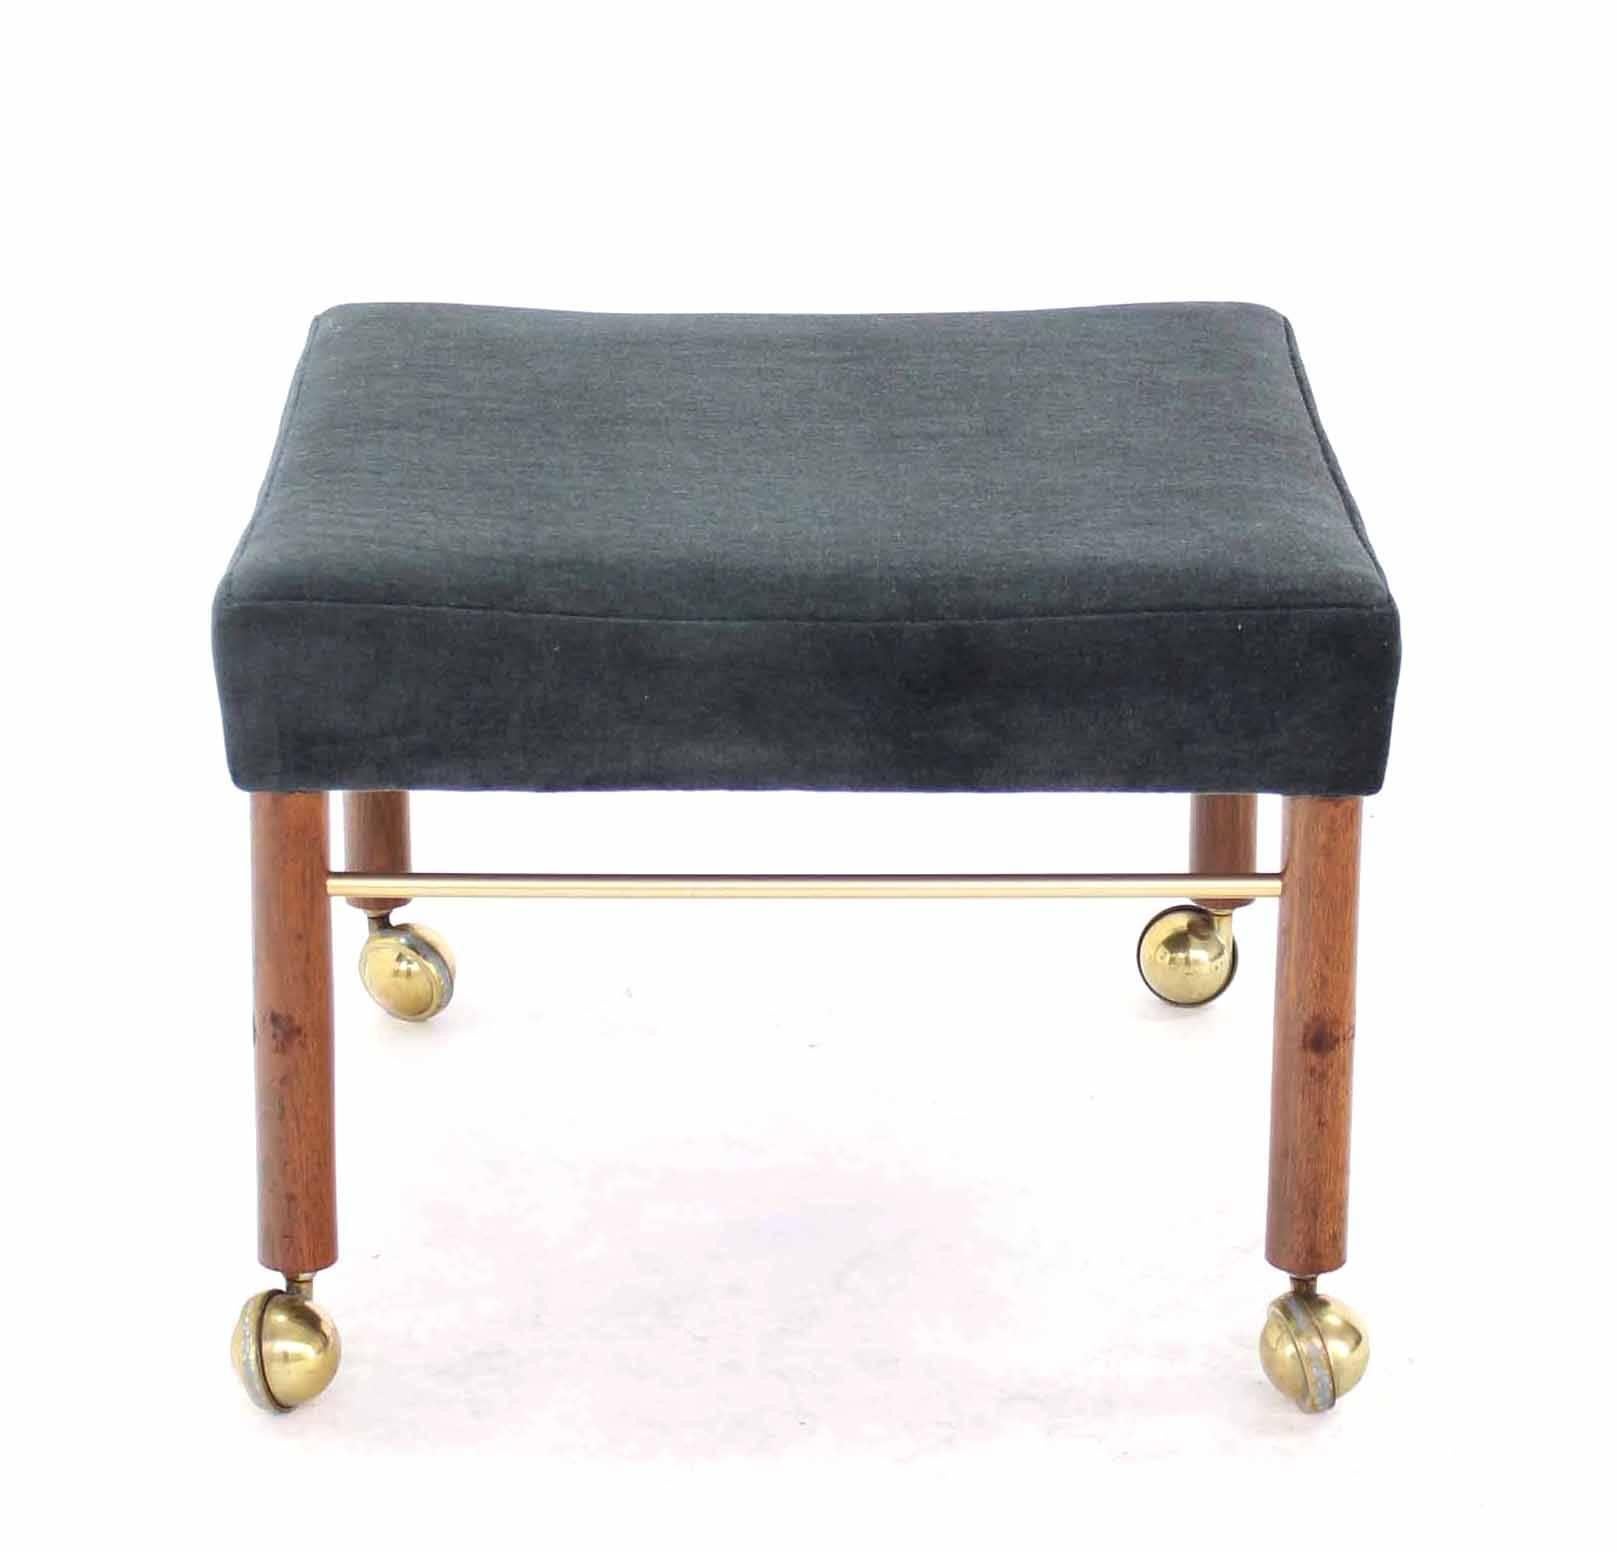 Mid-Century Modern Square Newly Upholstered in Black or Charcoal Mohair Bench